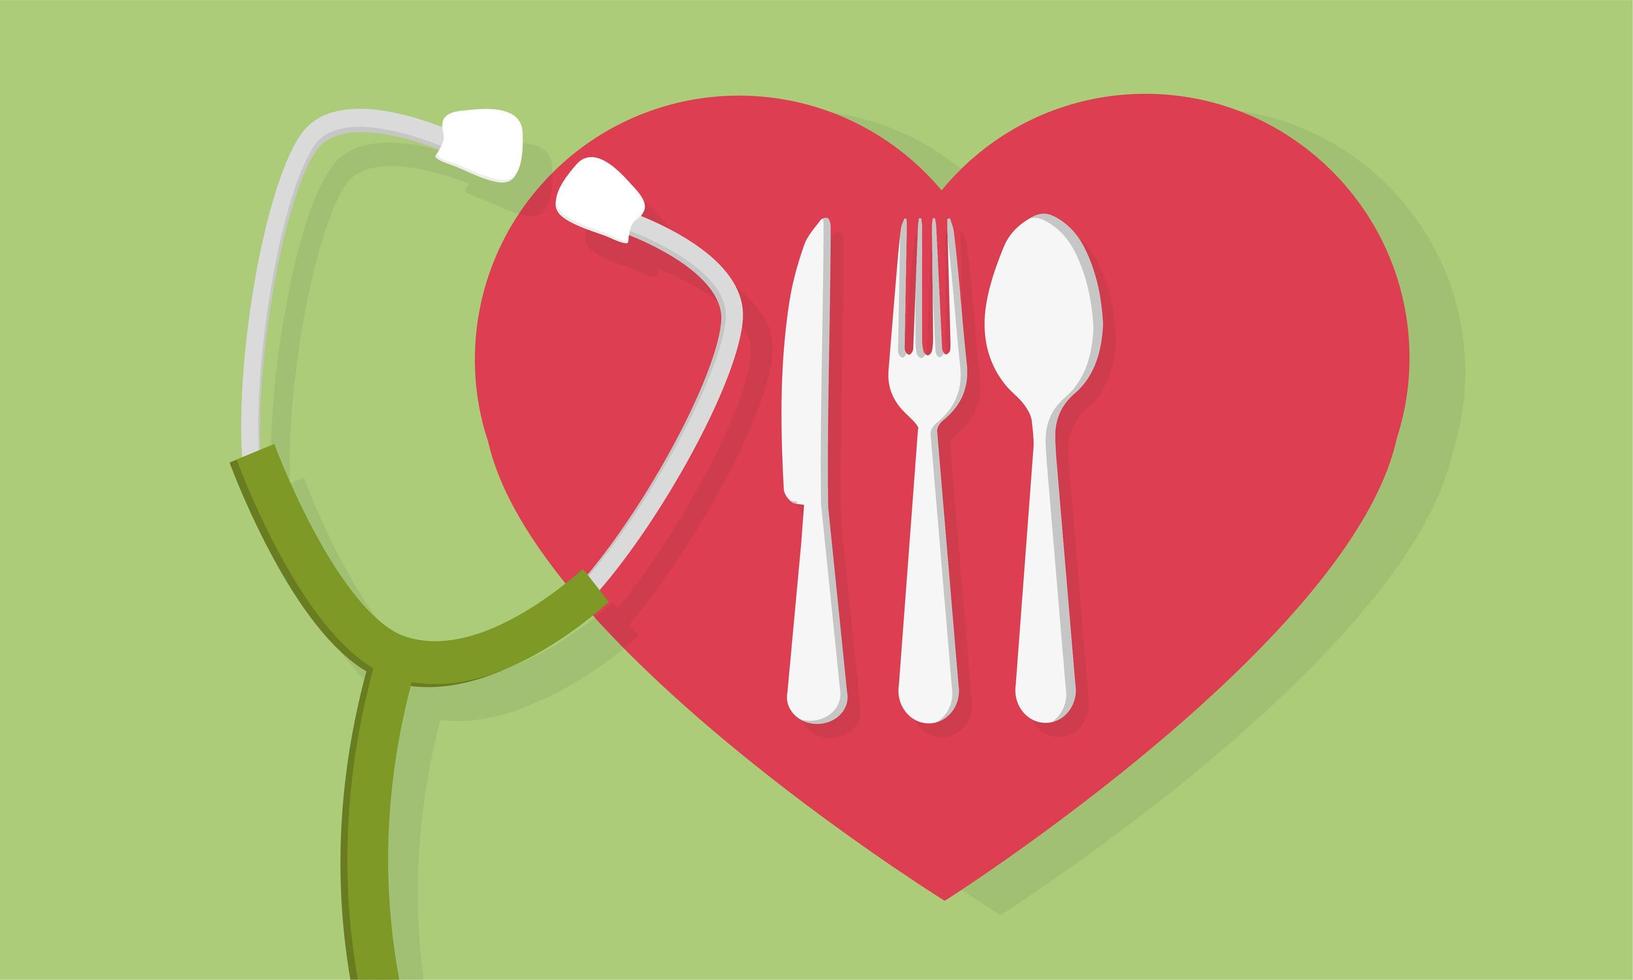 Fork spoon and knife with heart shape and a stethoscope medical concept vector